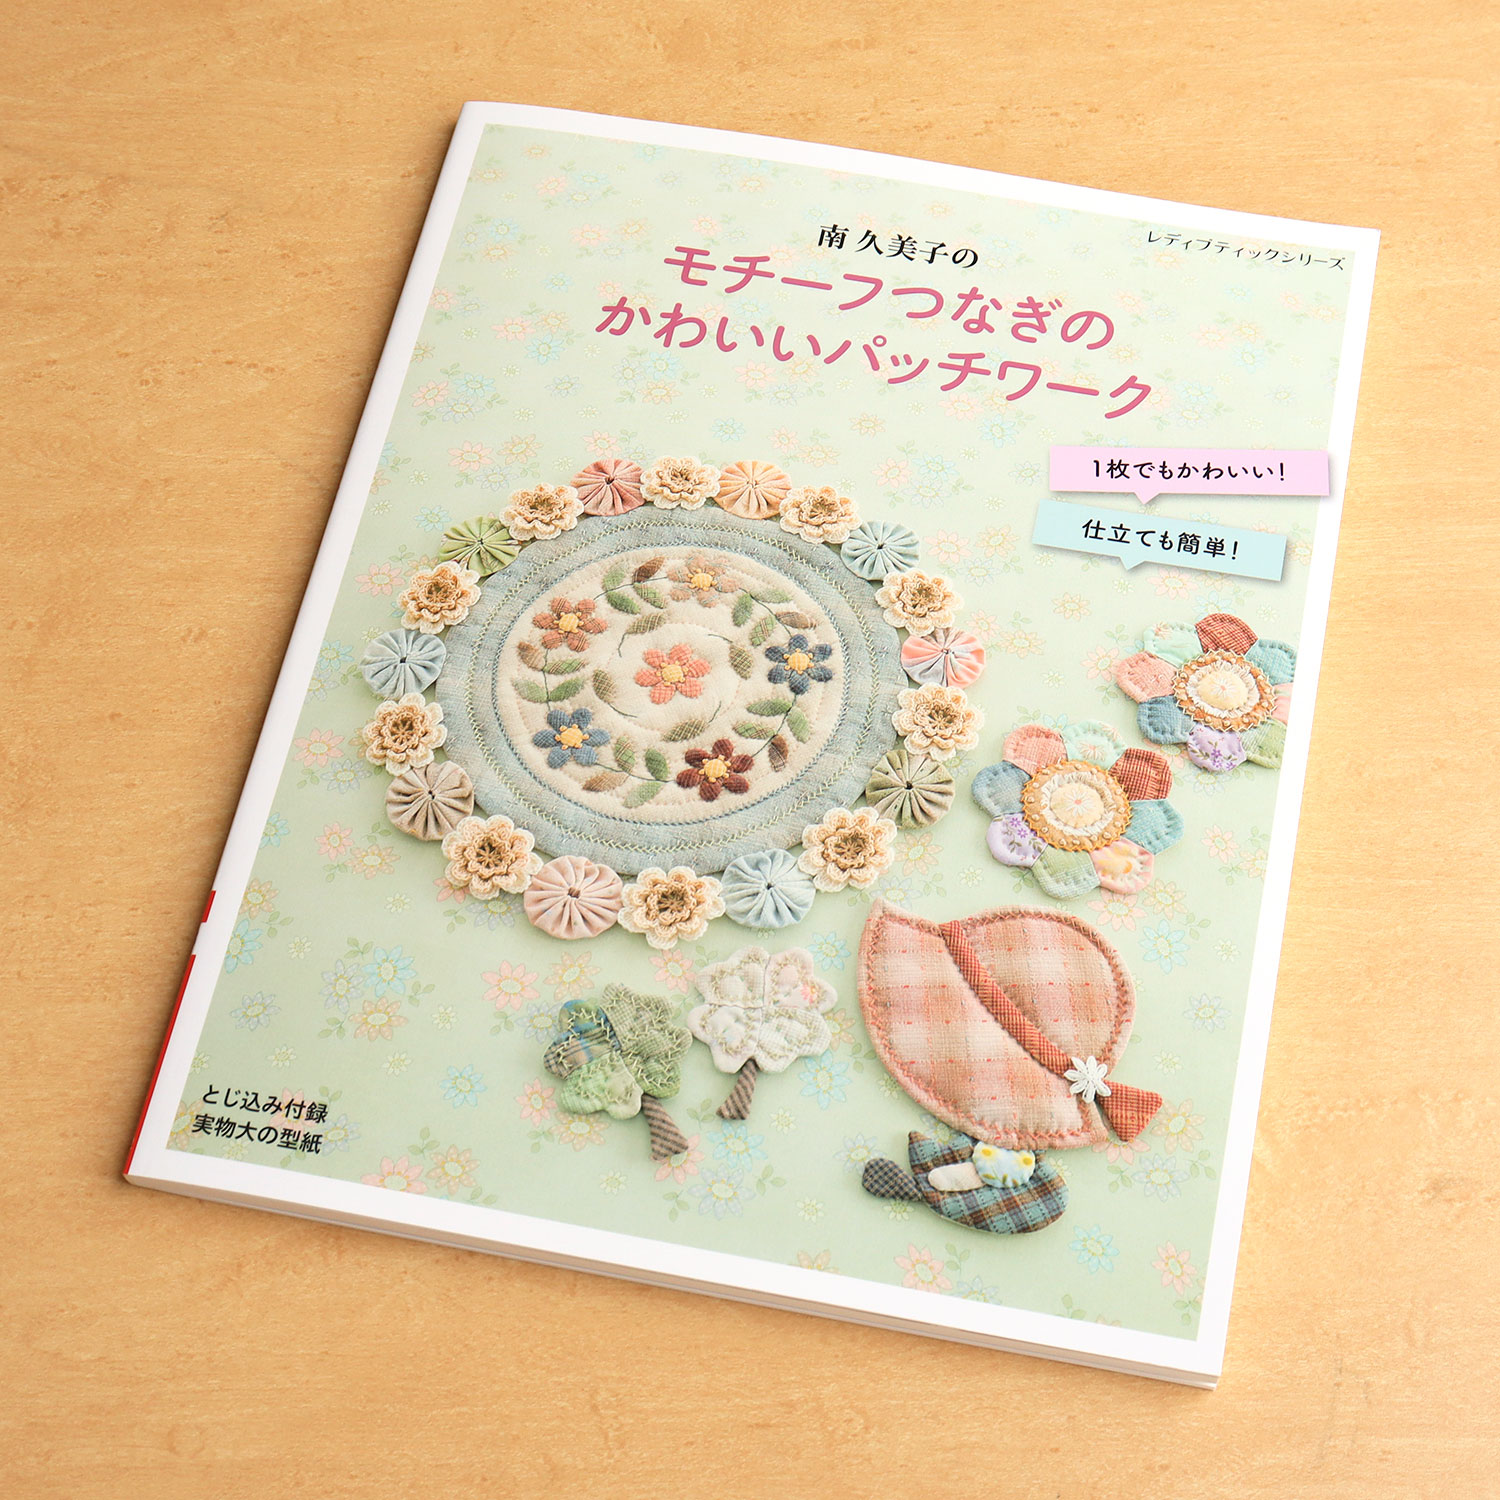 S8392 Cute Patchwork of Motifs Connected by Minami Kumiko(book)